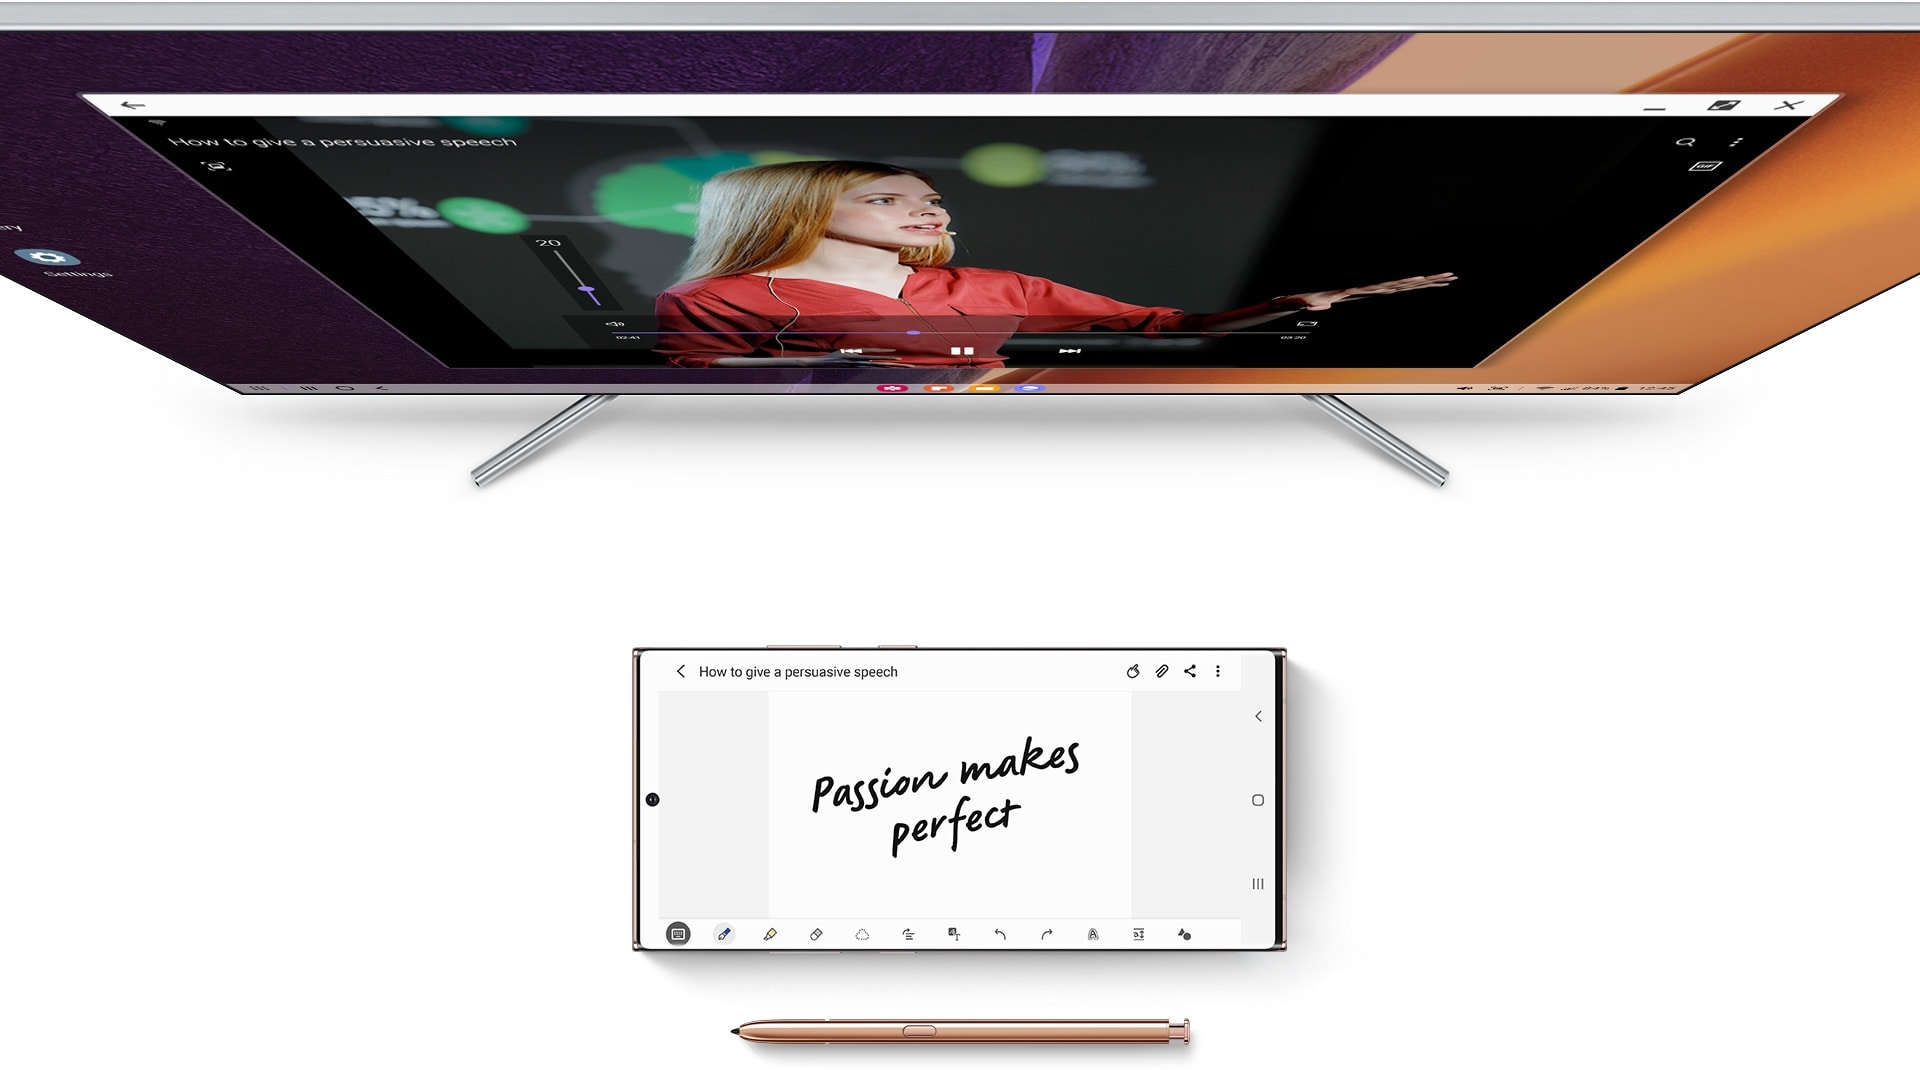 Galaxy Note20 Ultra, bronze S Pen, and a Samsung TV on a desk, connected via Wireless DeX. Galaxy Note20 Ultra has Samsung Notes app onscreen with writing that says “Passion makes perfect”. On the TV is a video called How to give a persuasive speech with a woman giving a talk.